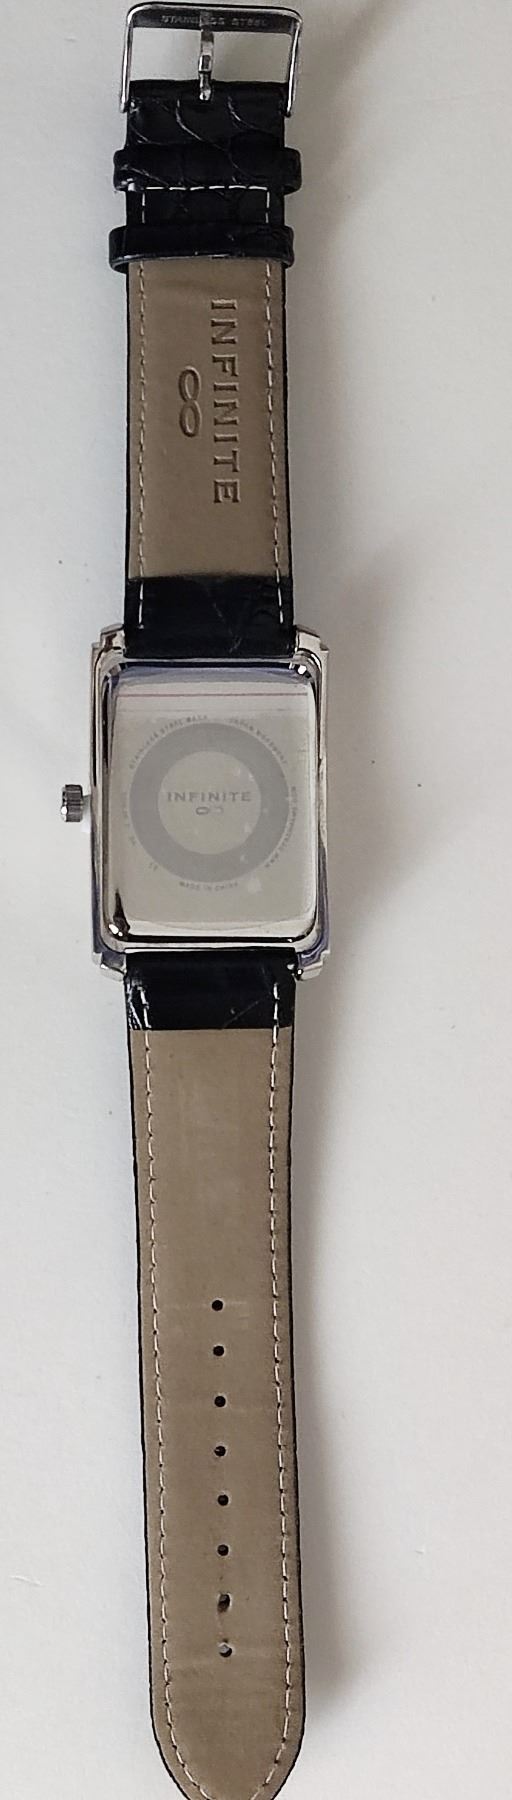 A gent's new Infinite rectangle faced watch, - Image 3 of 3